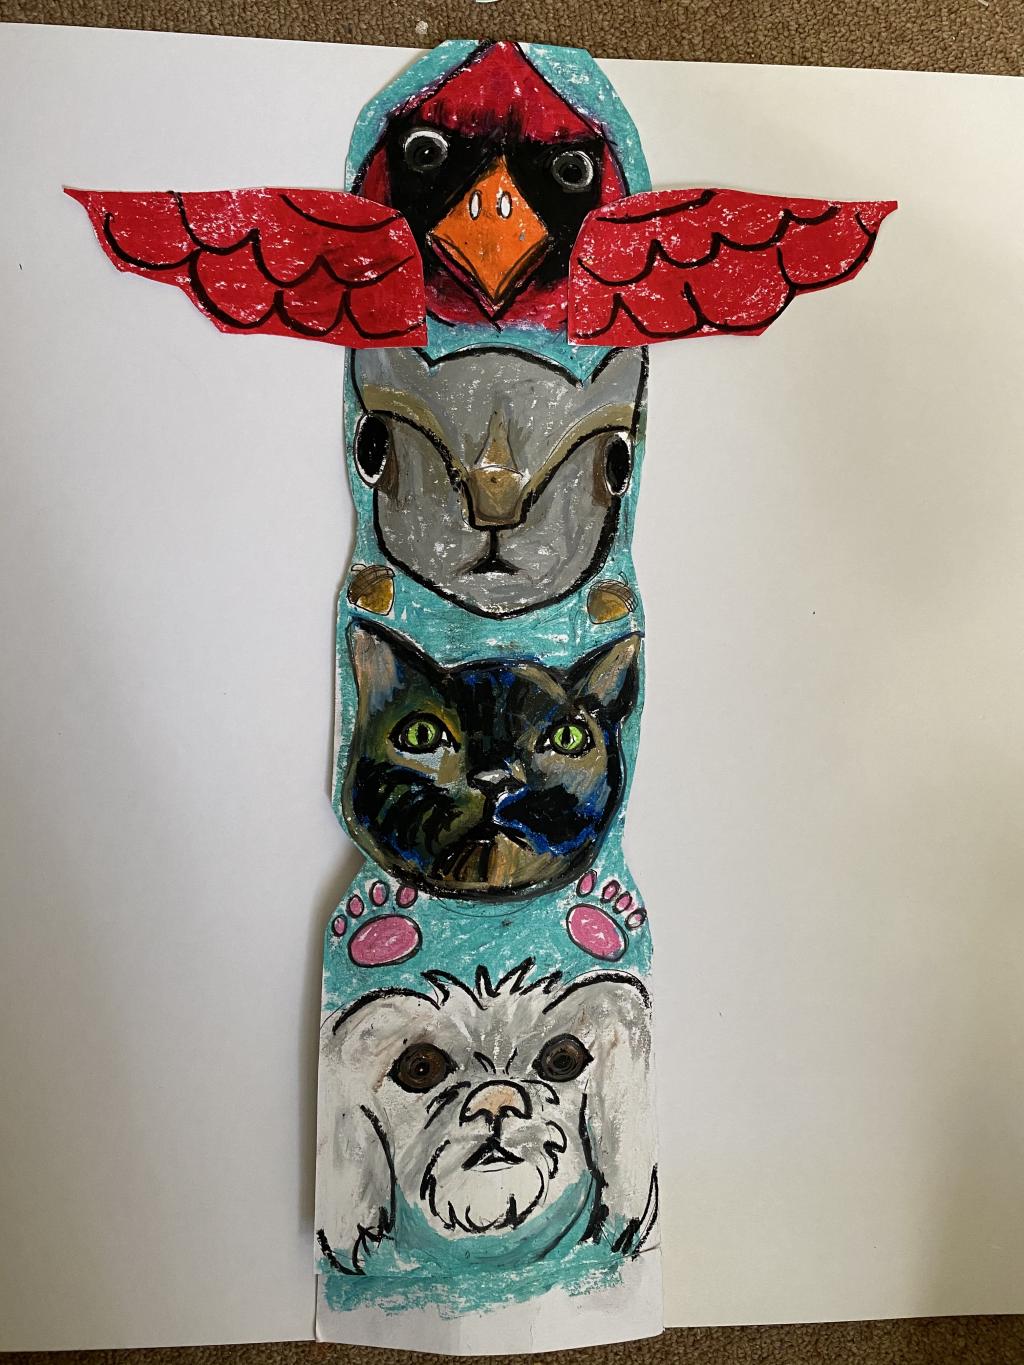 A totem pole drawn on paper featuring a cardinal, a rabbit, a cat and a dog from top to bottom.